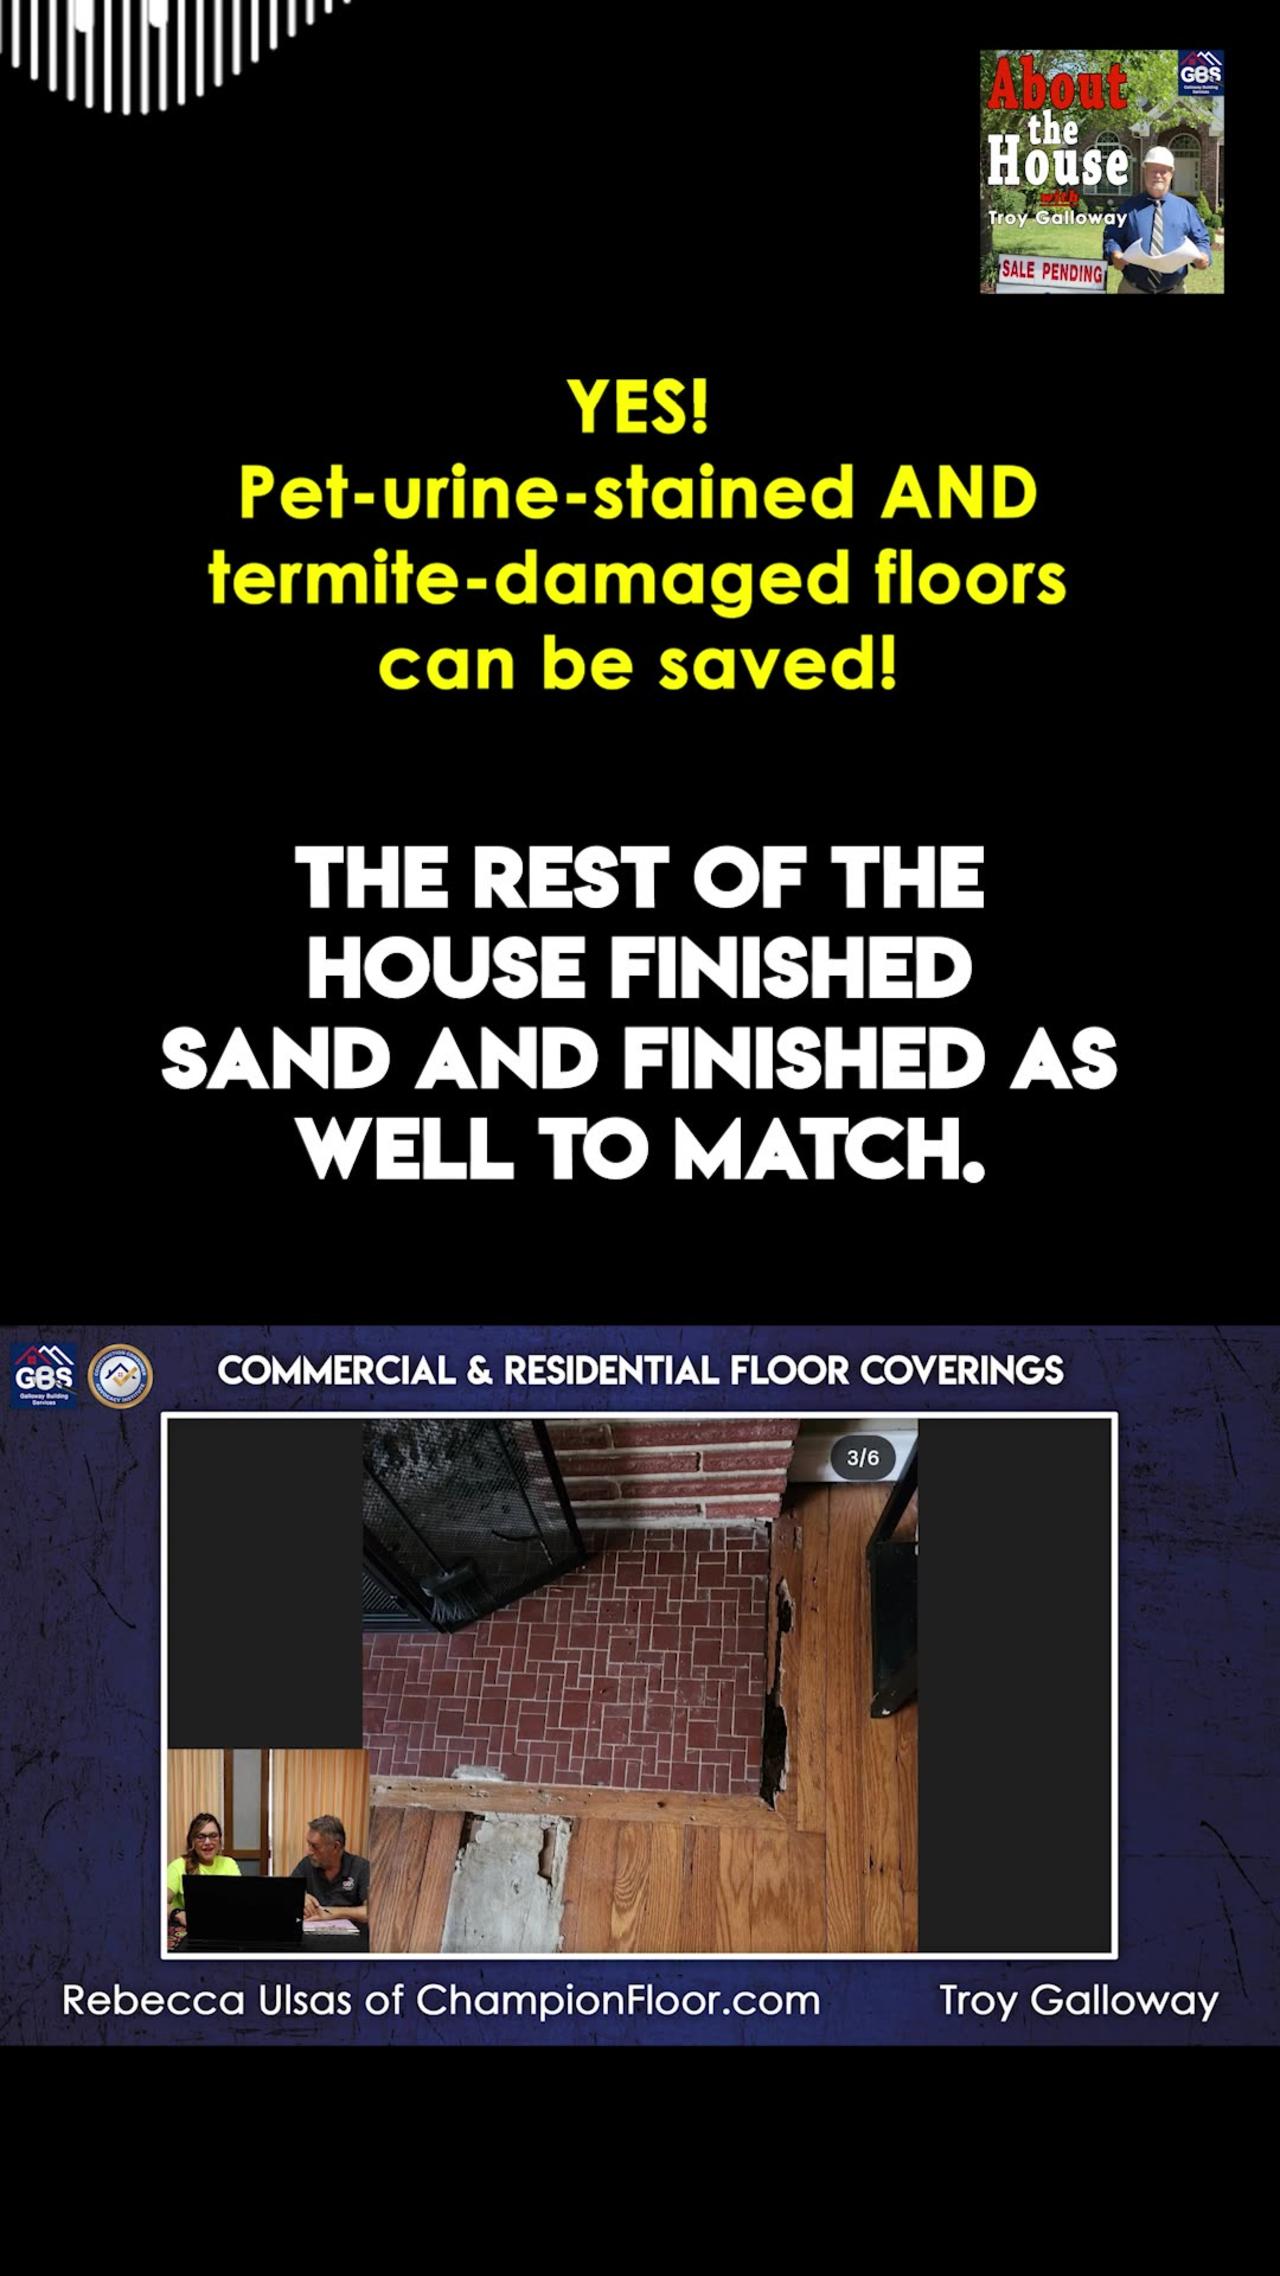 Pet-urine-stained and termite-damaged floors CAN be saved!